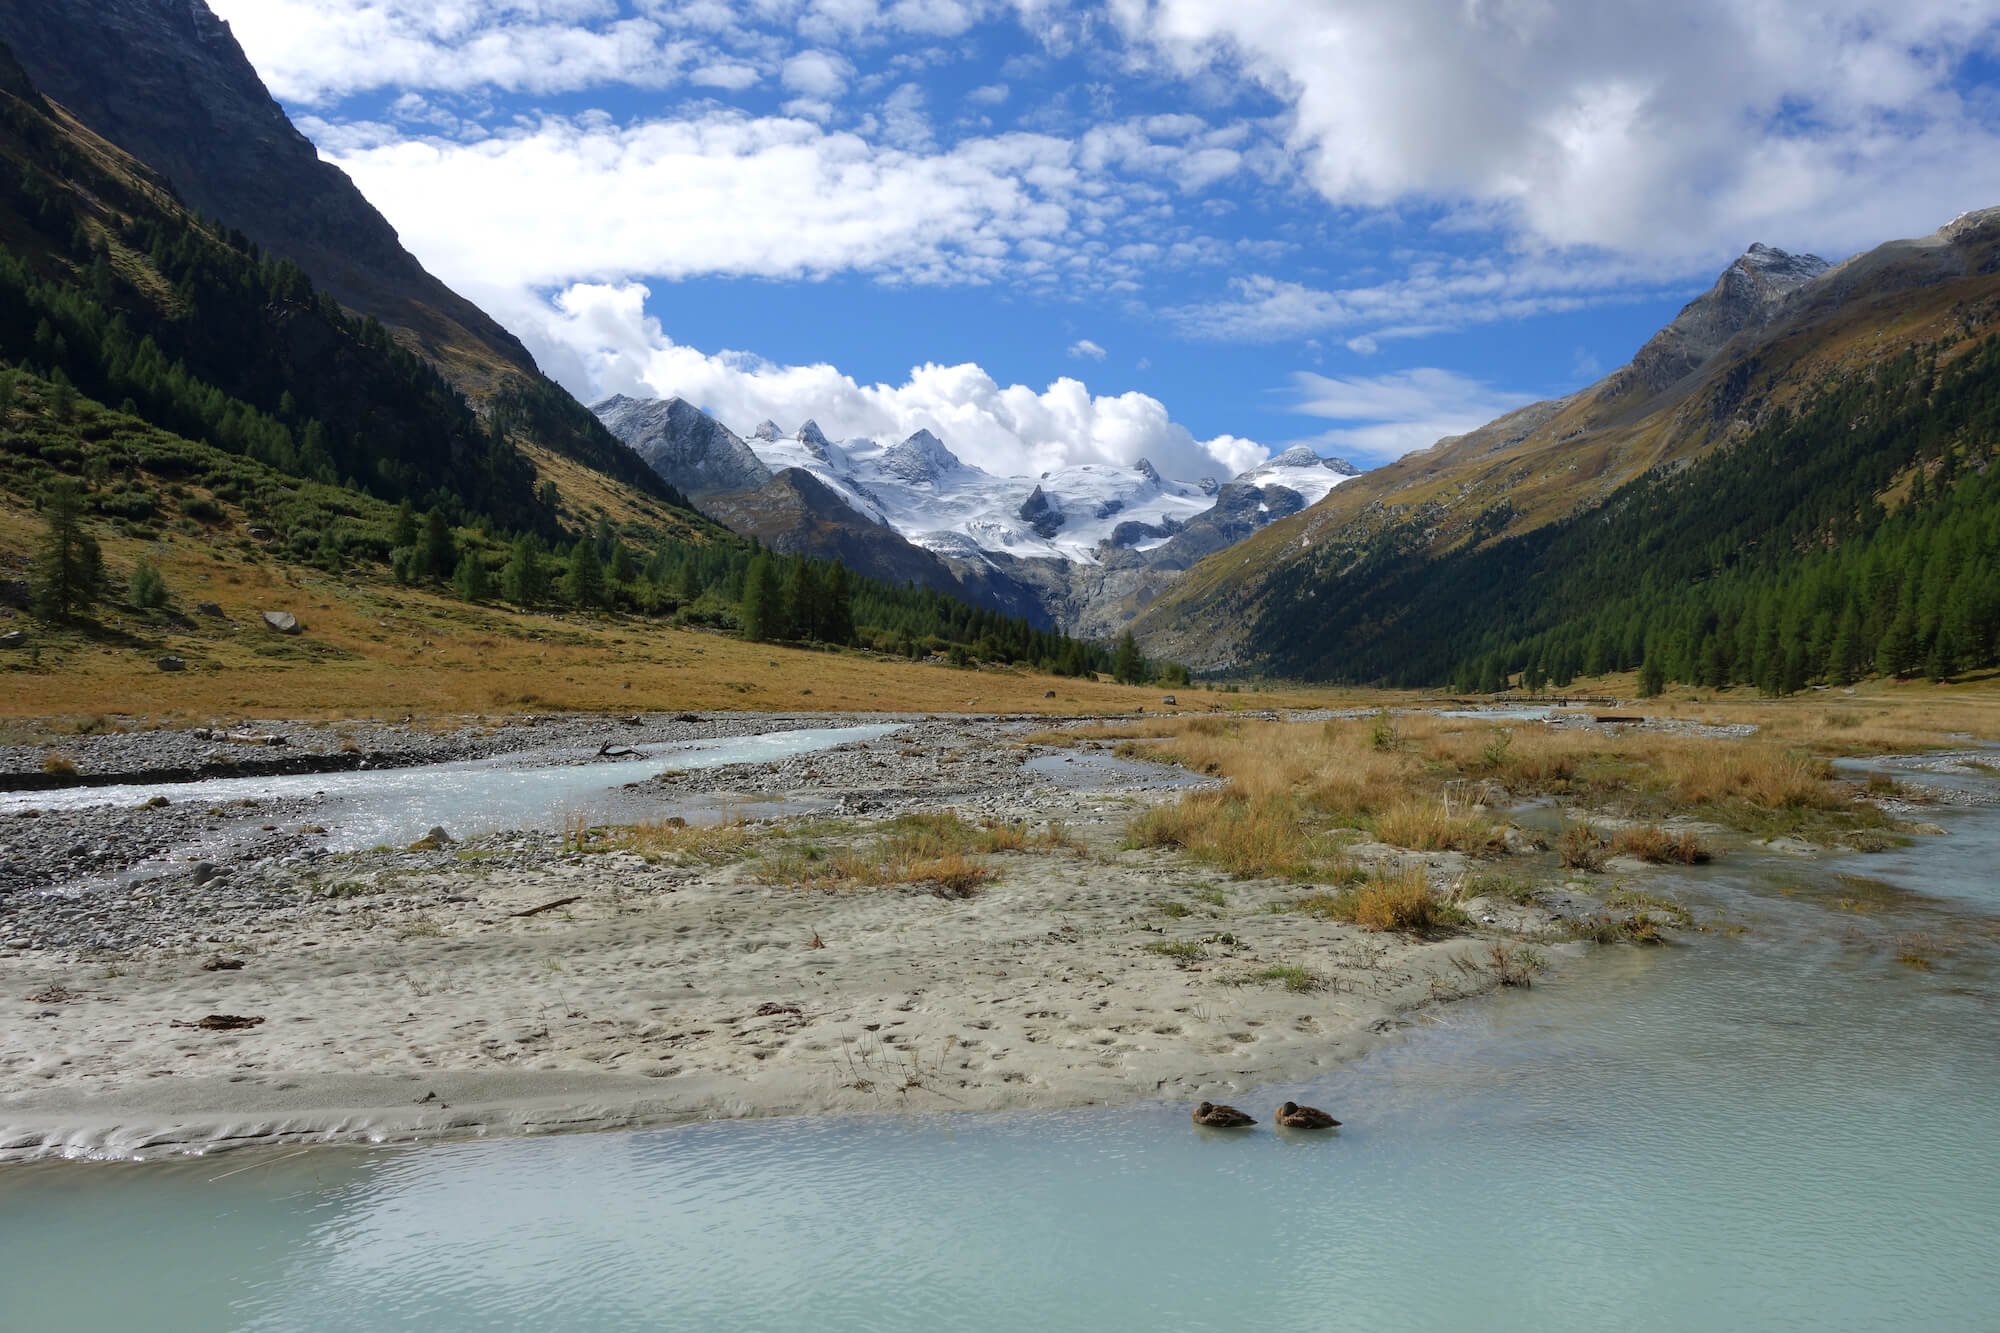 The spectacular view from where the valley opens up, near the Hotel Restaurant Roseg Gletscher